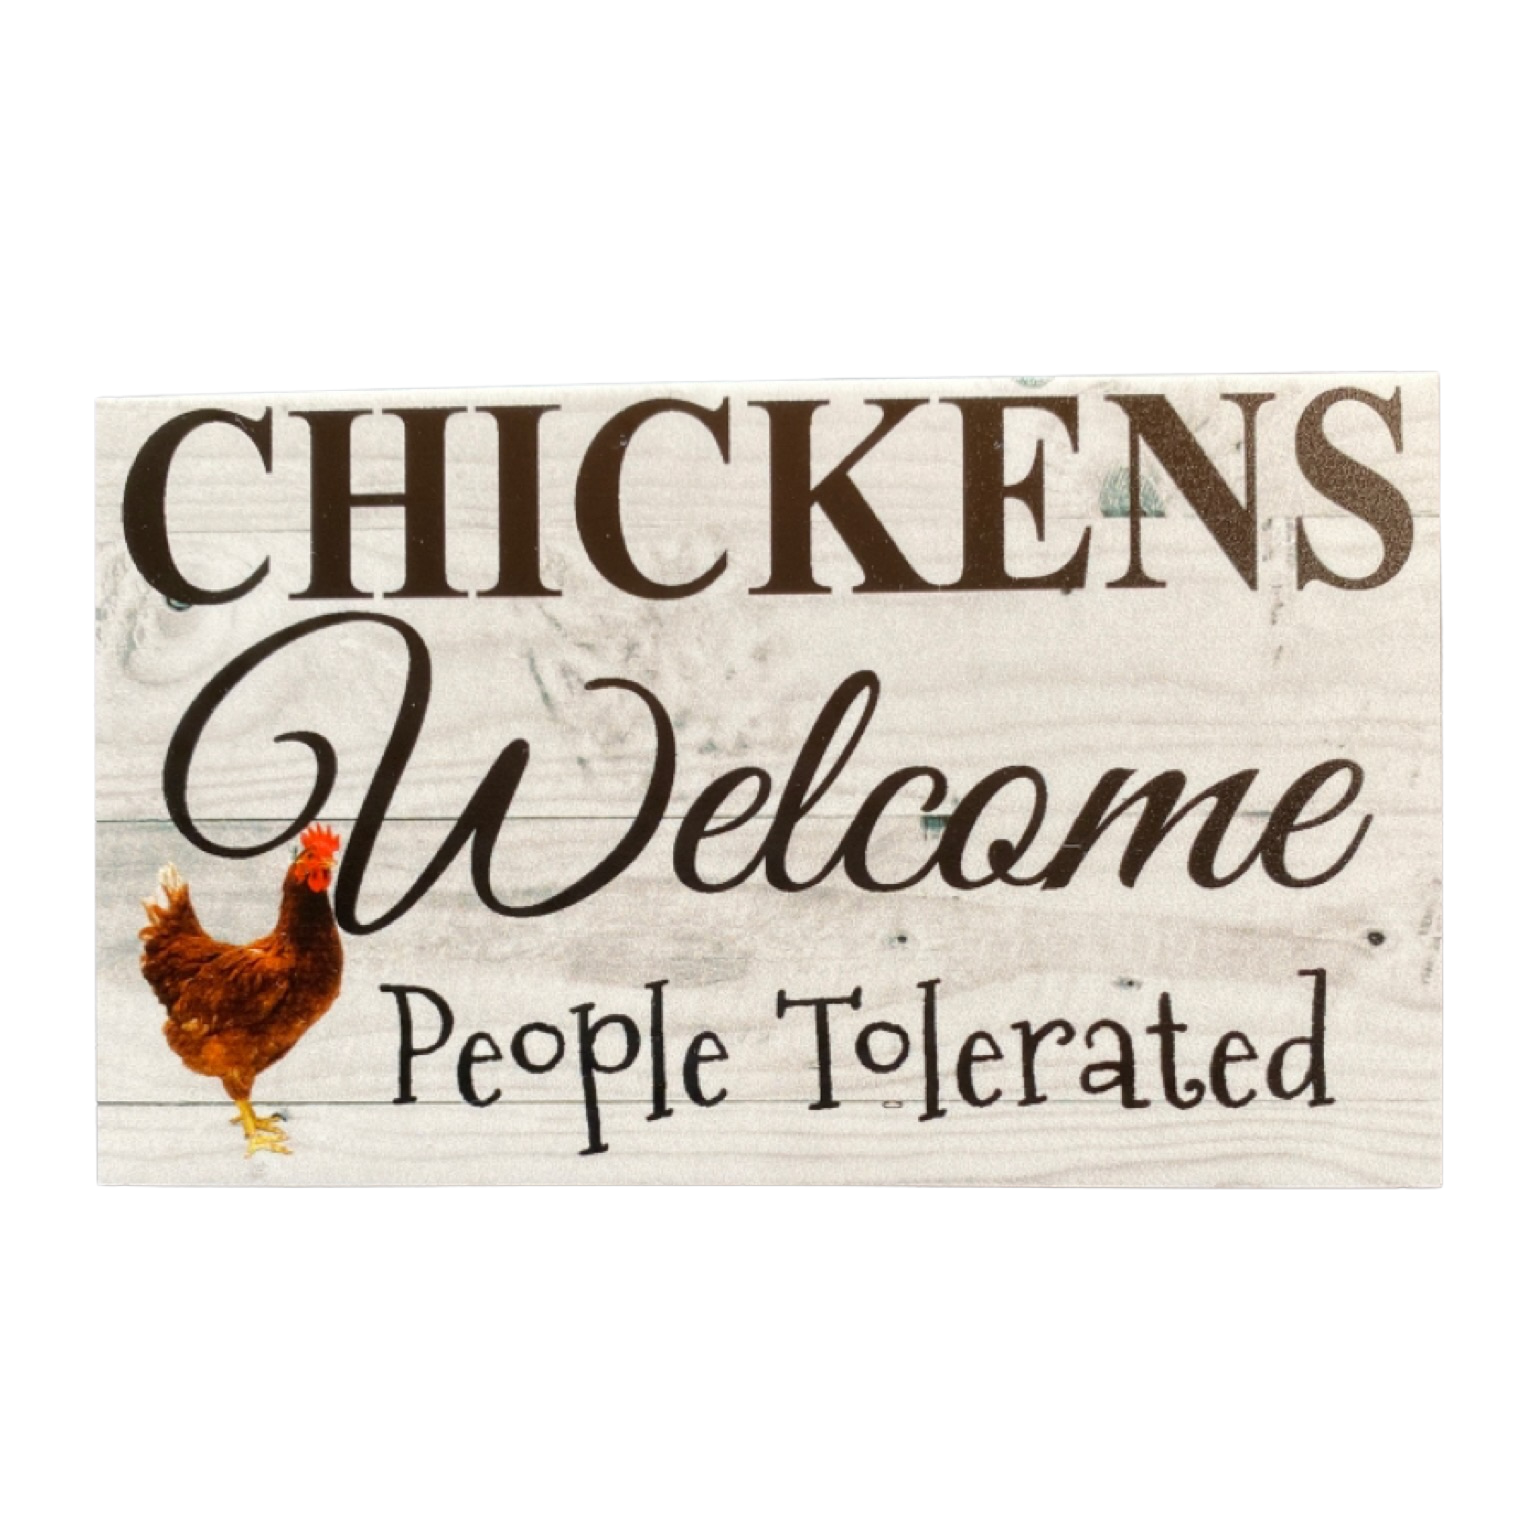 Chickens Welcome People Tolerated Funny Sign - The Renmy Store Homewares & Gifts 